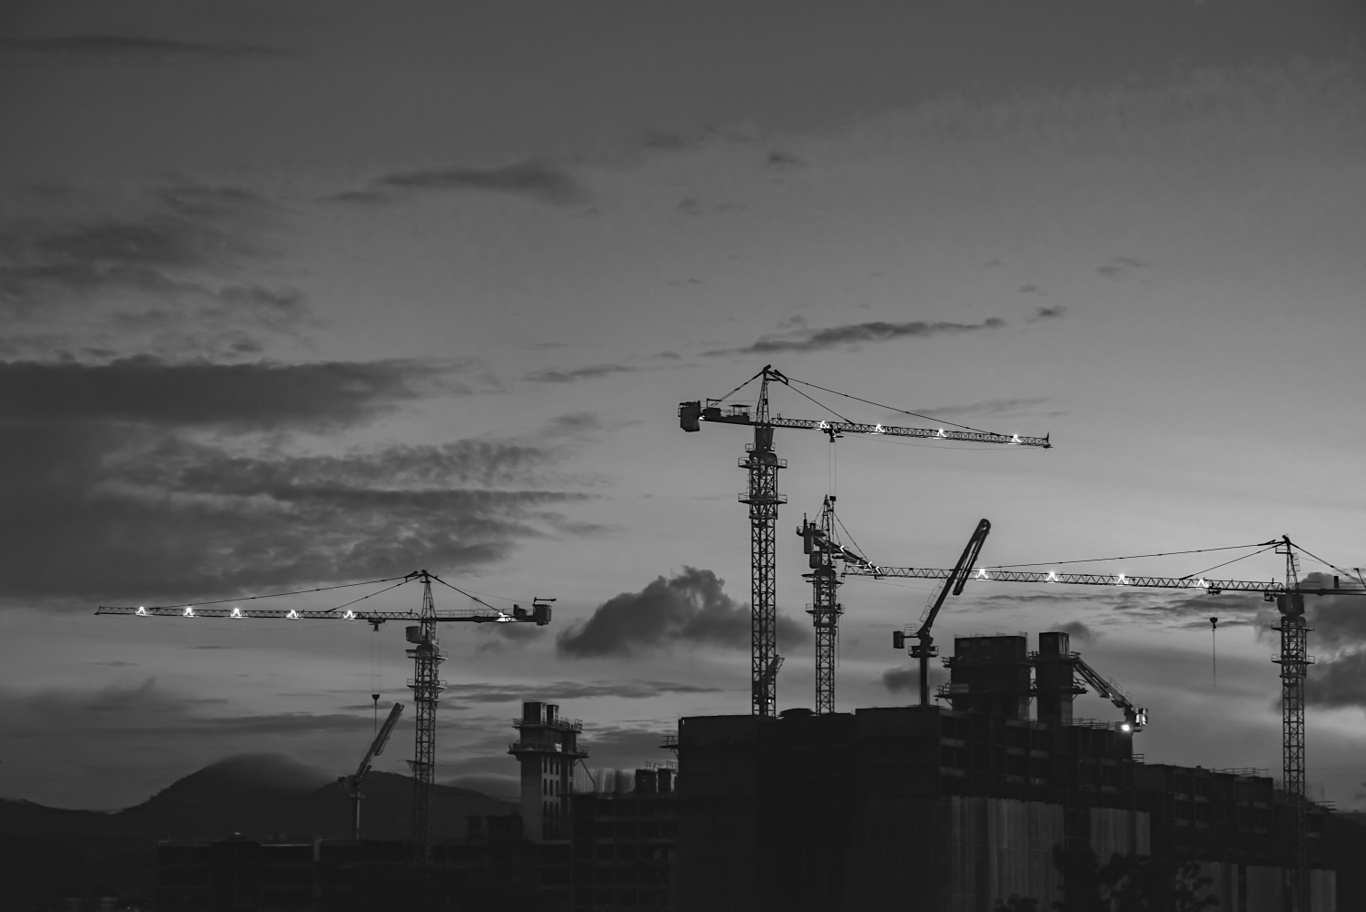 Cranes against a skyline at sunset